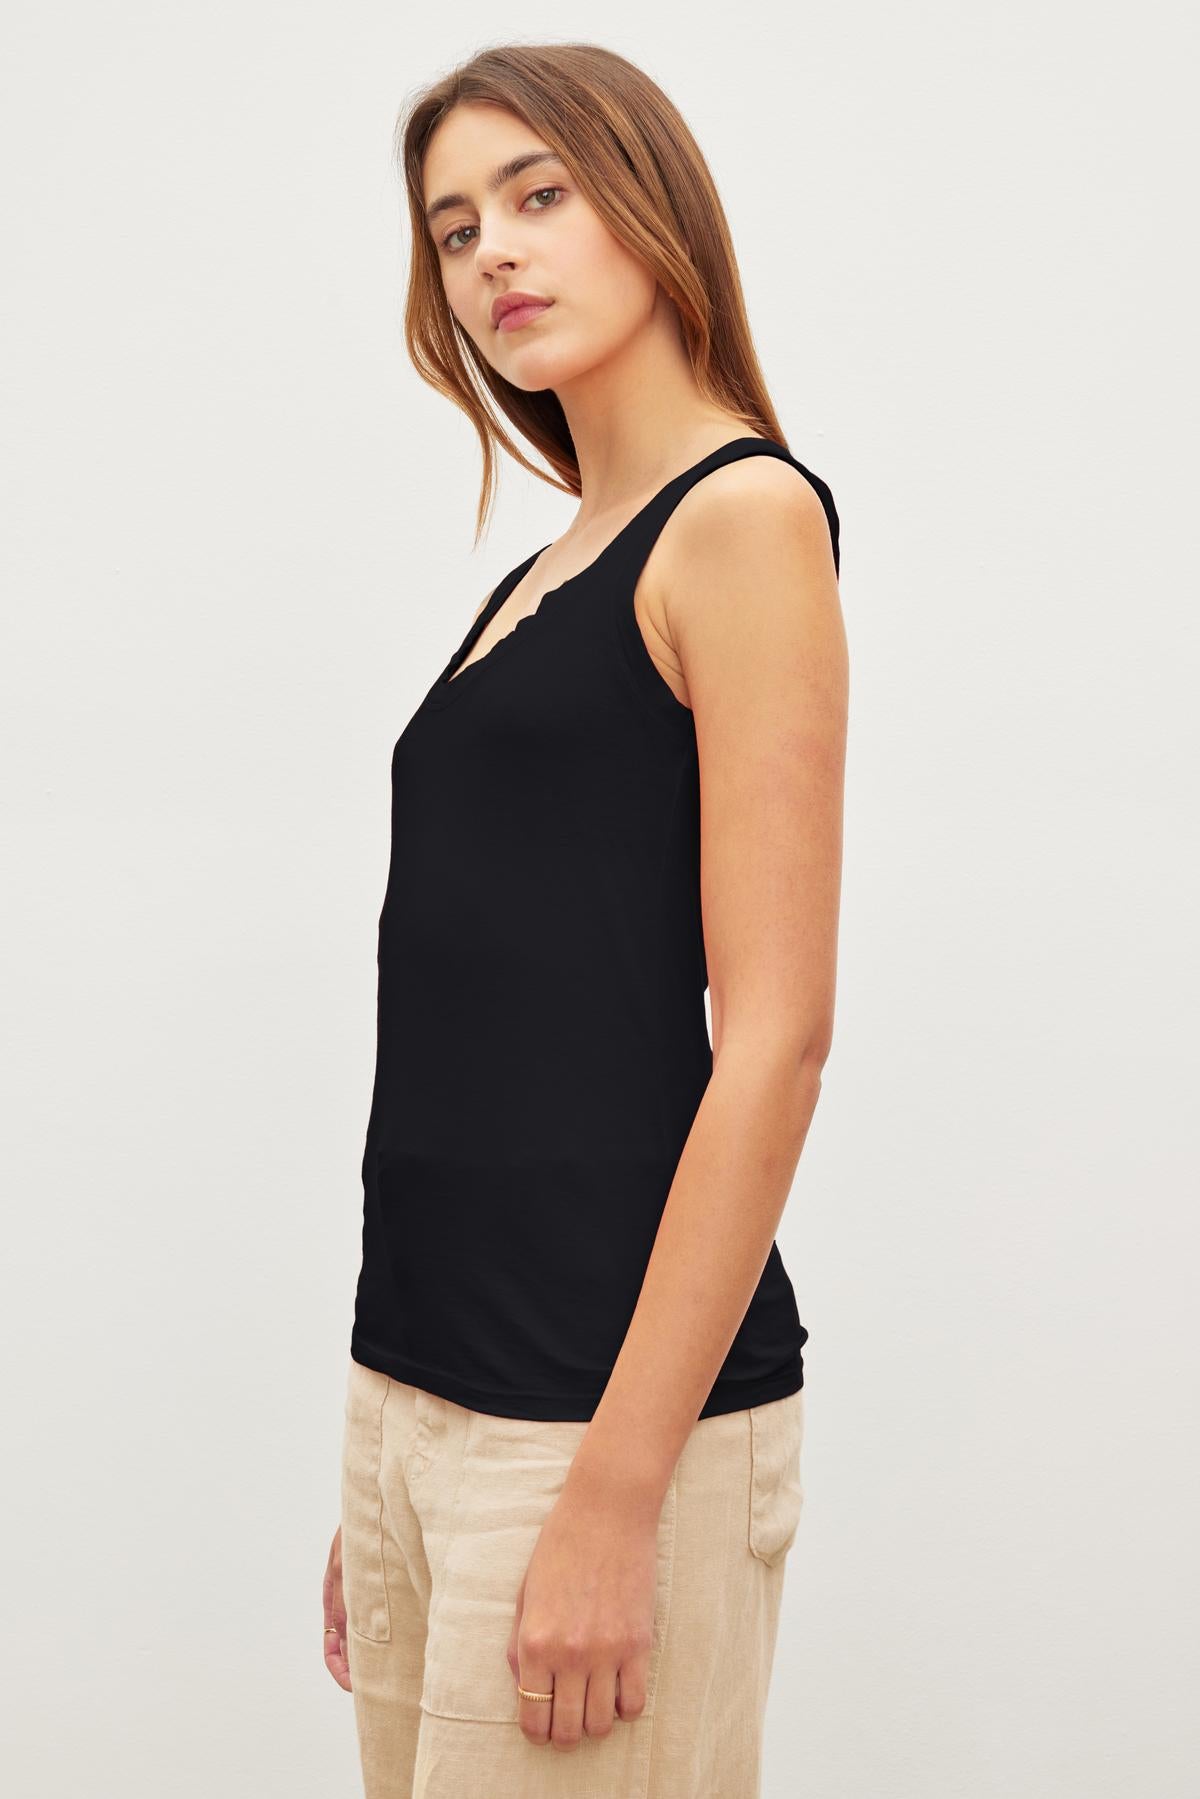   A woman in a Velvet by Graham & Spencer MOSSY GAUZY WHISPER FITTED TANK and beige pants stands against a plain background, looking at the camera with a neutral expression. 